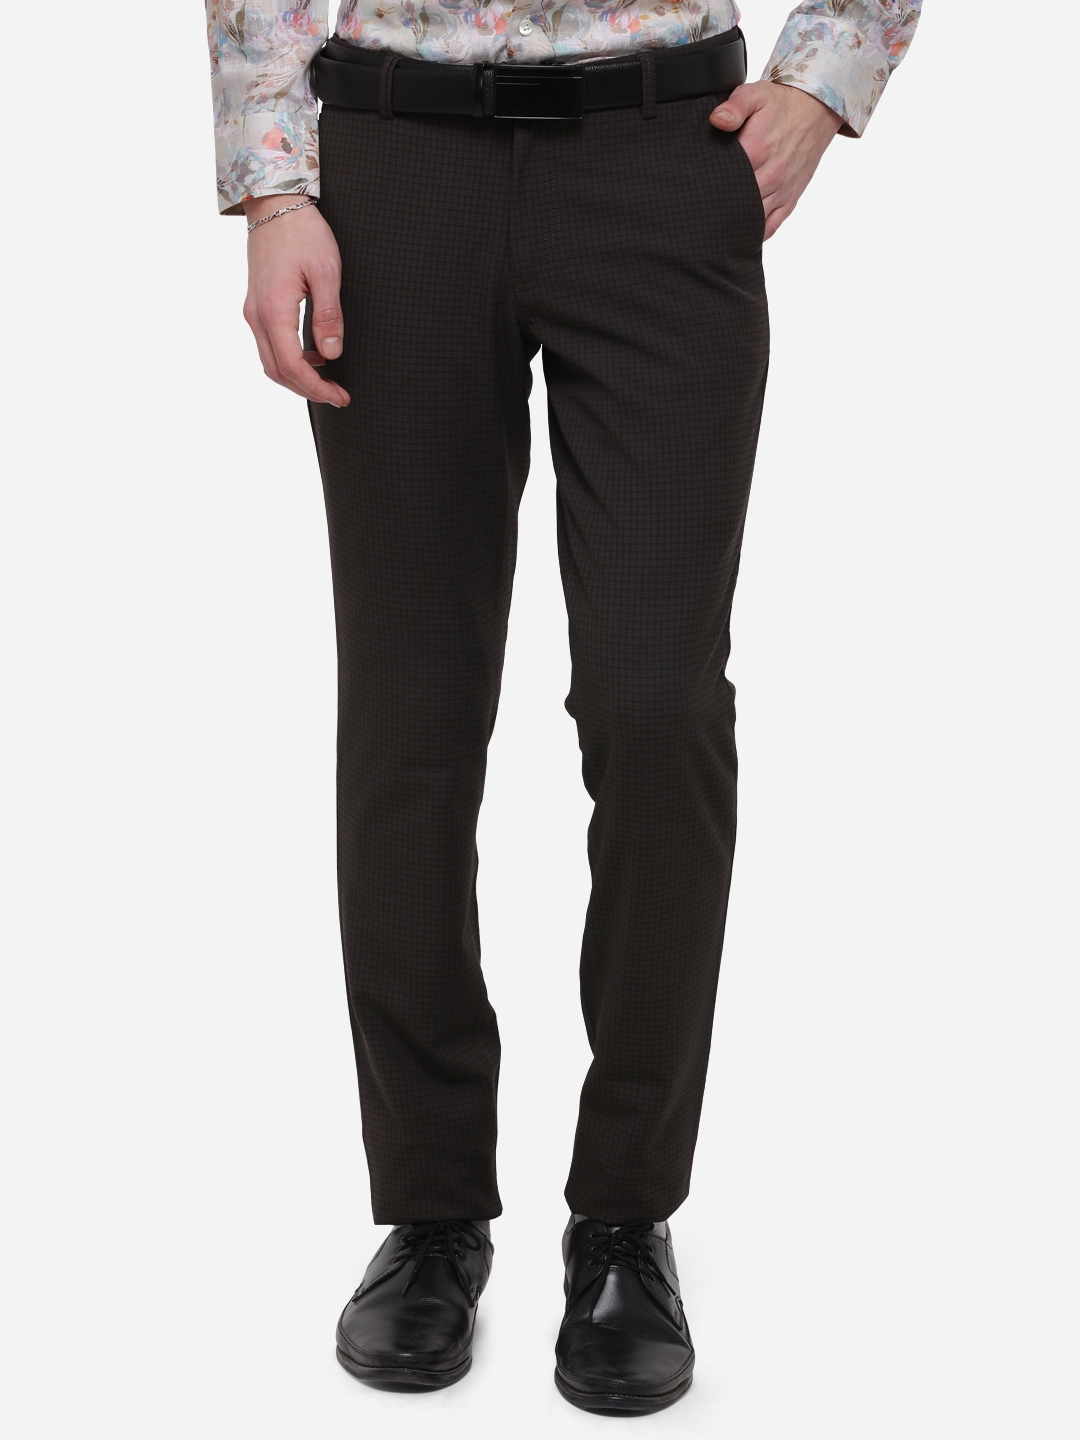 JB Studio | Brown Checked Formal Trousers -2067 (2067 BROWN CHEX)